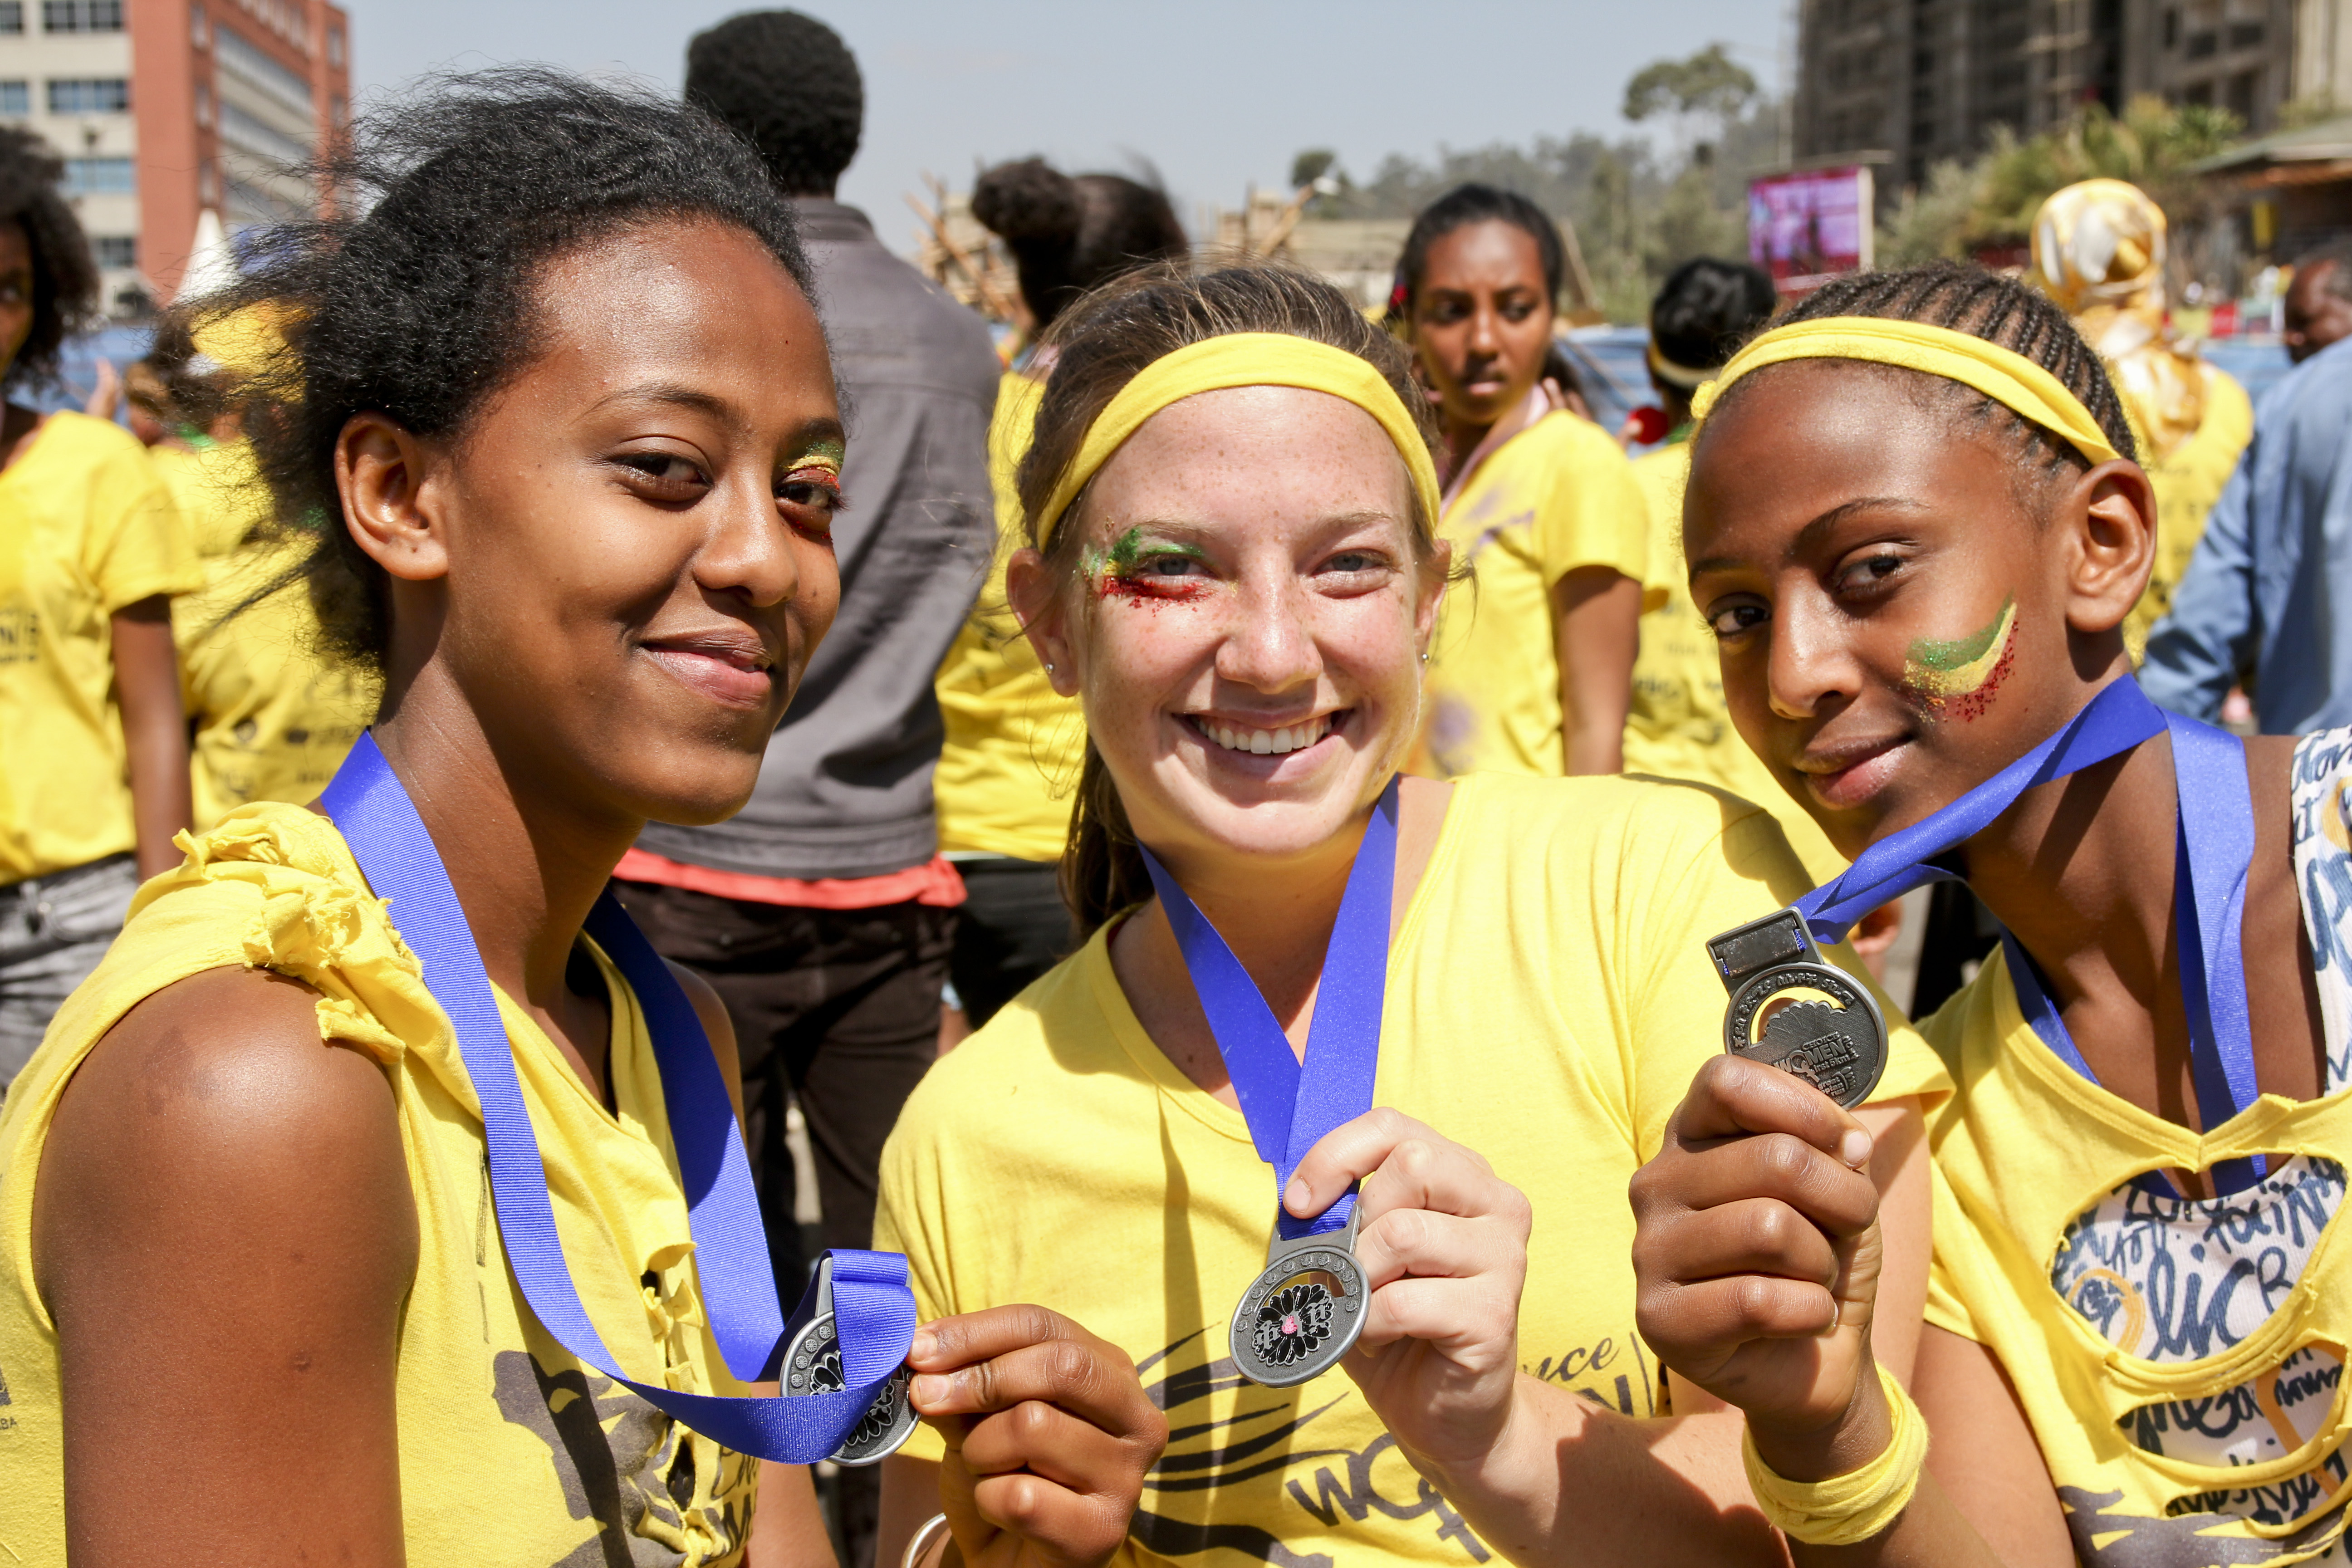 Lauren and two students holding race medals